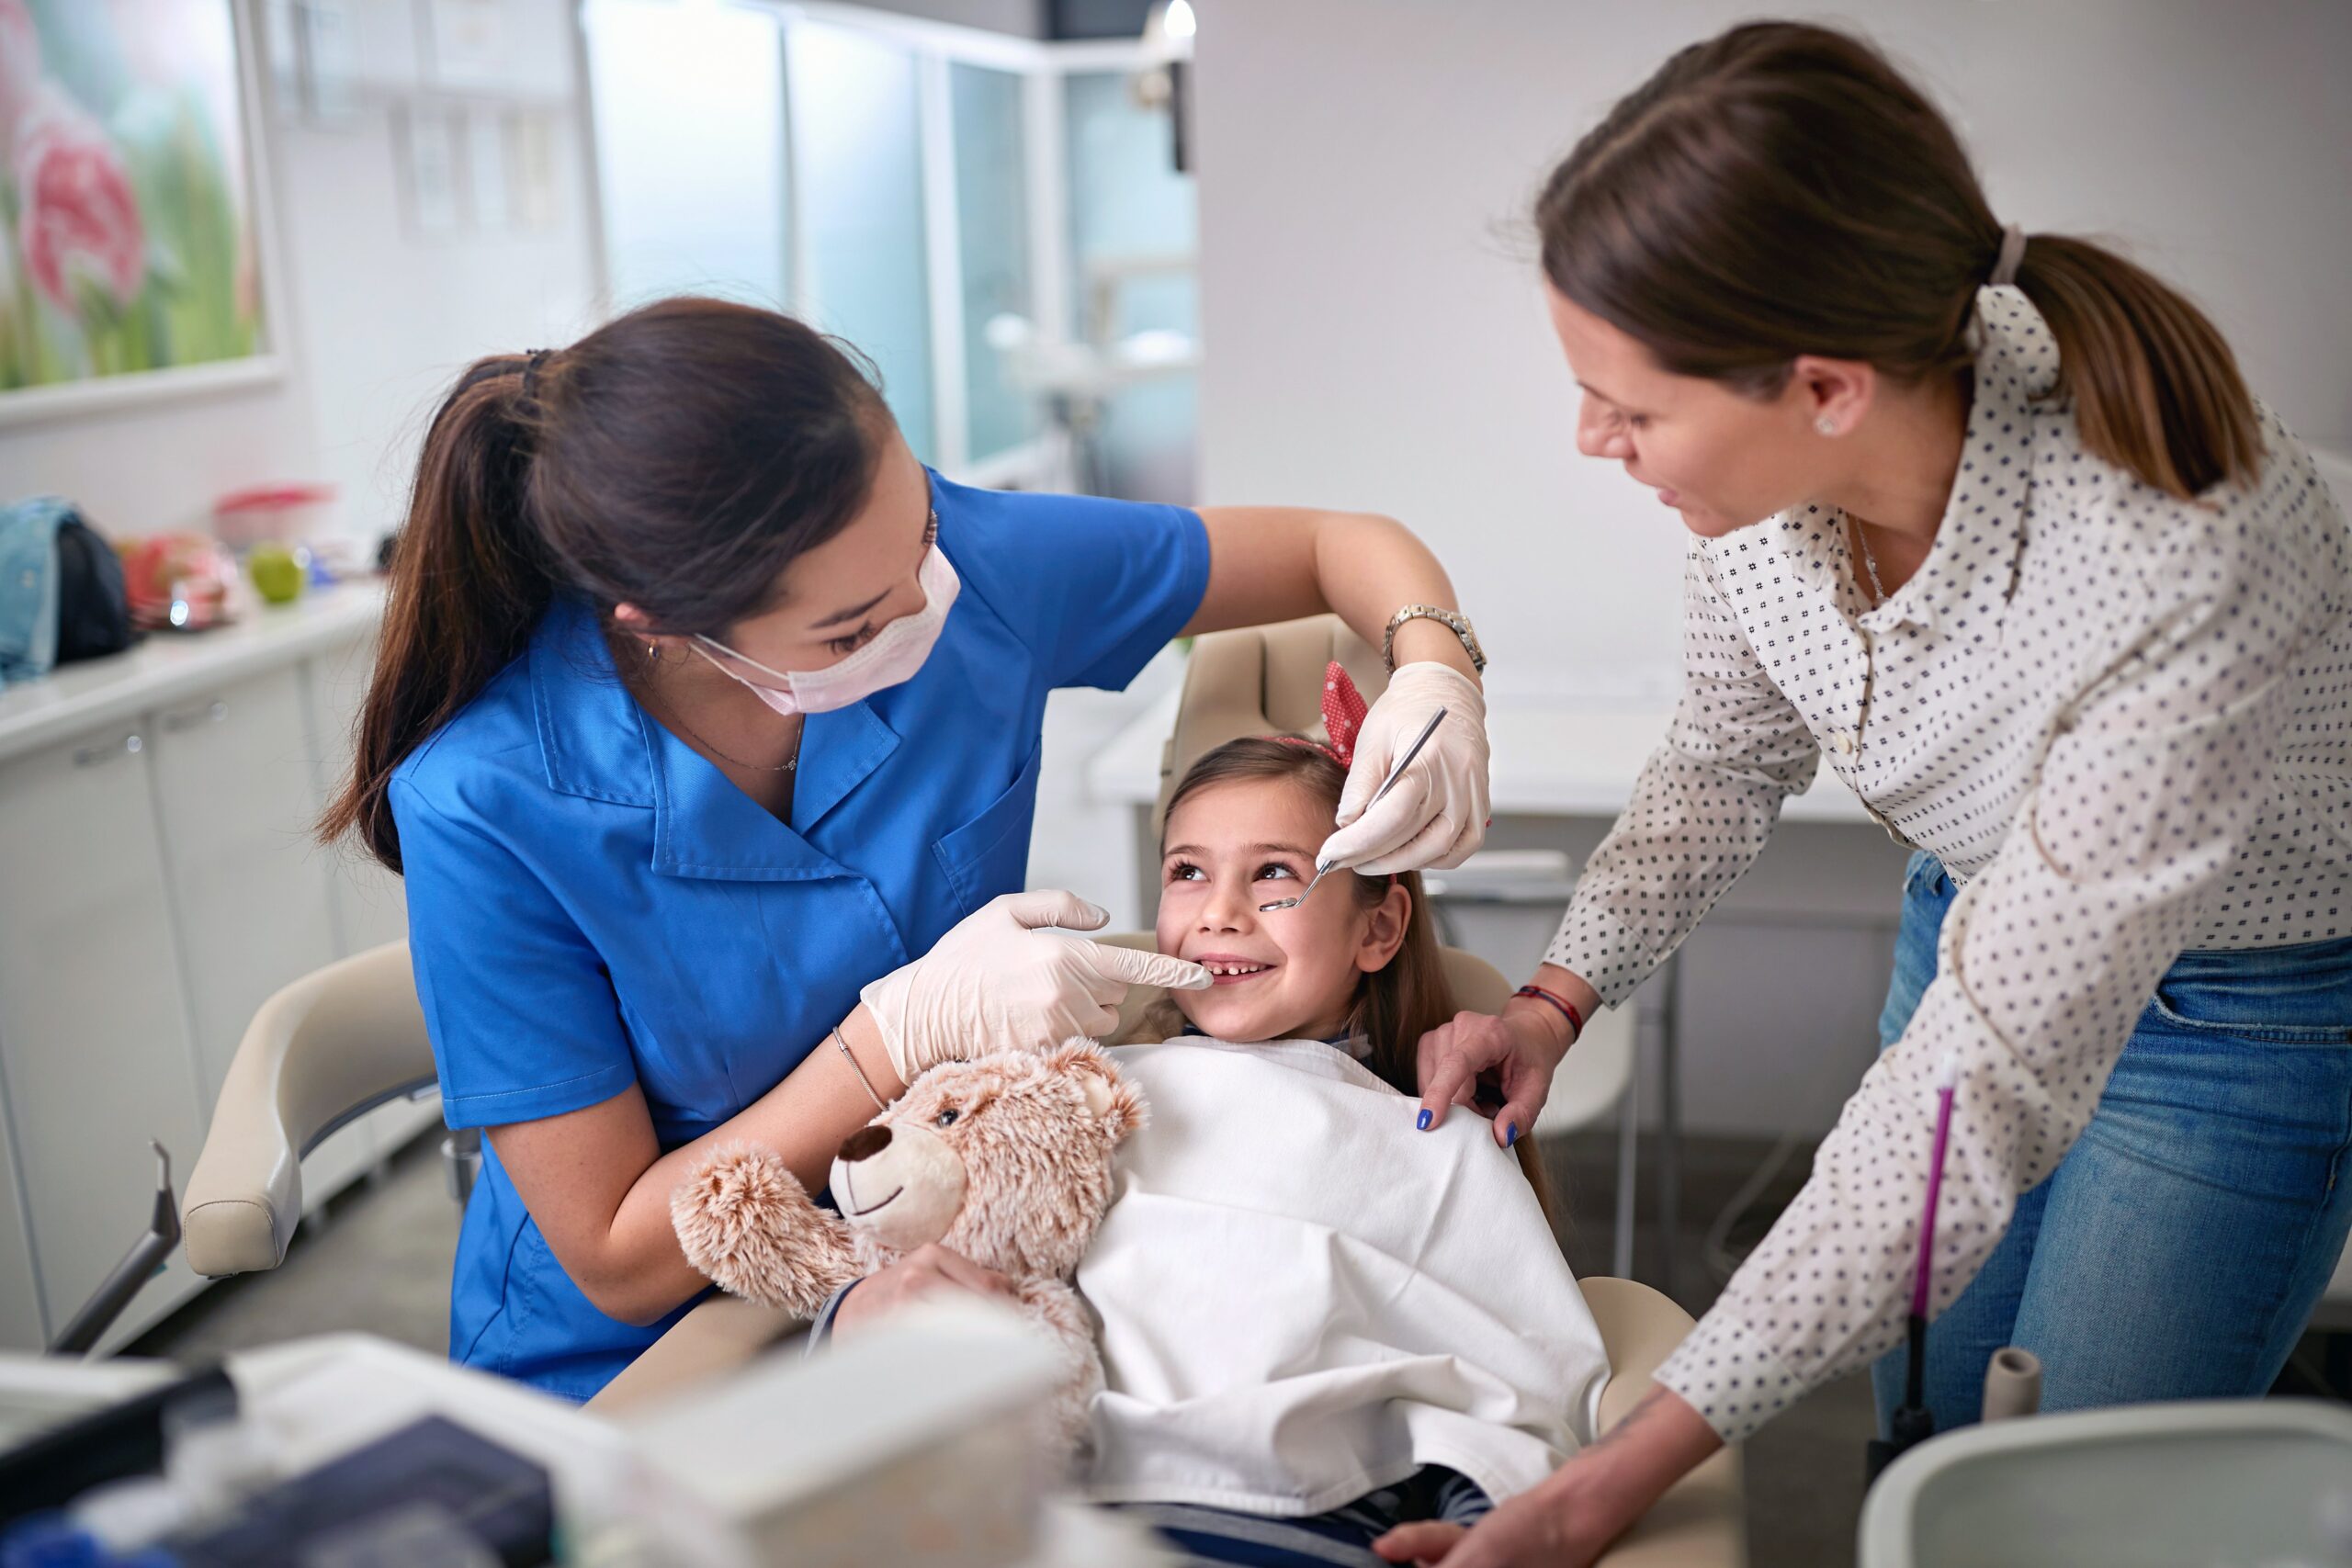 San Antonio's Guide to Braces: Everything Parents Need to Know